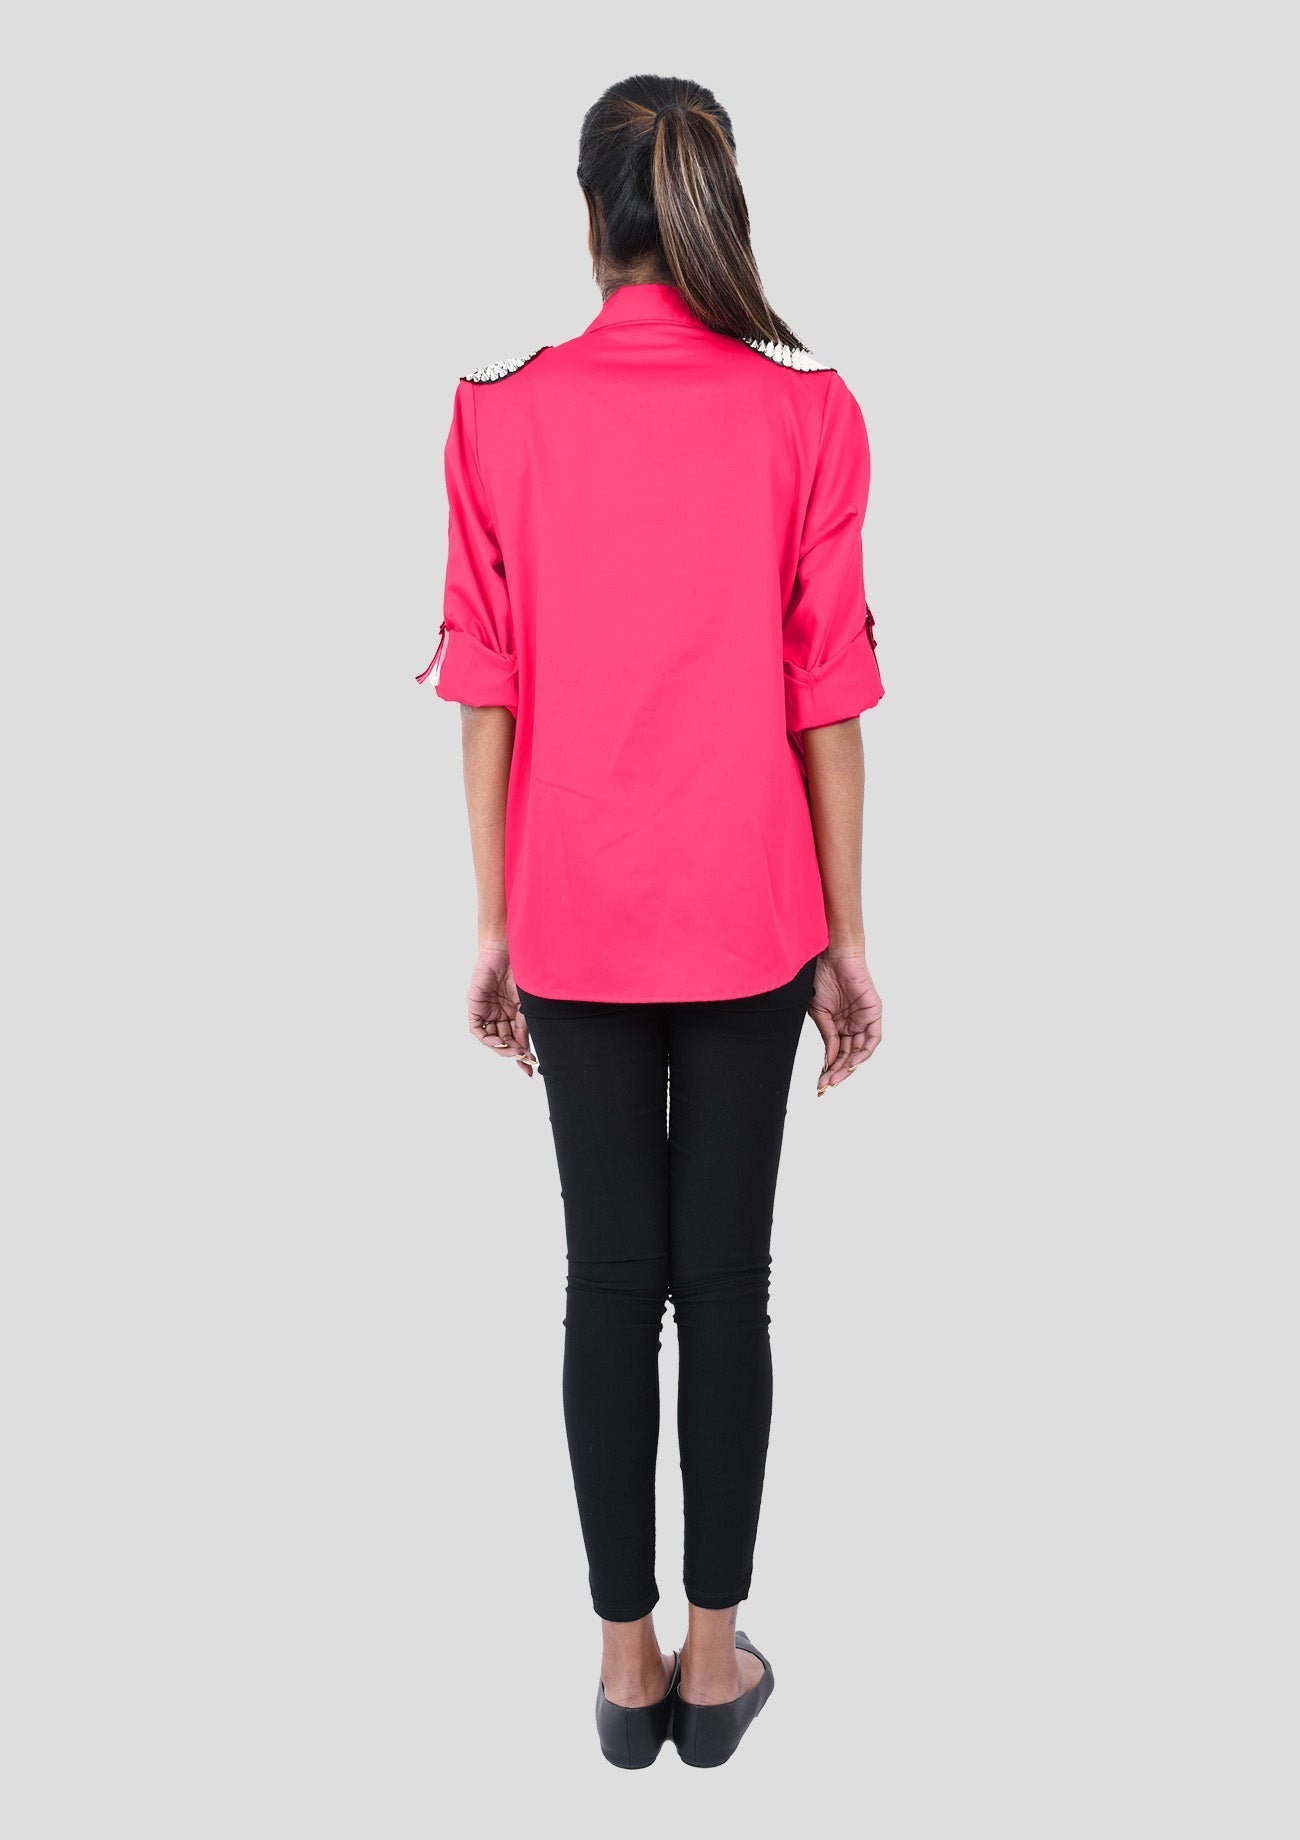 Dark Pink Cotton Shirt With Shoulder Spikes And Stripe Tape